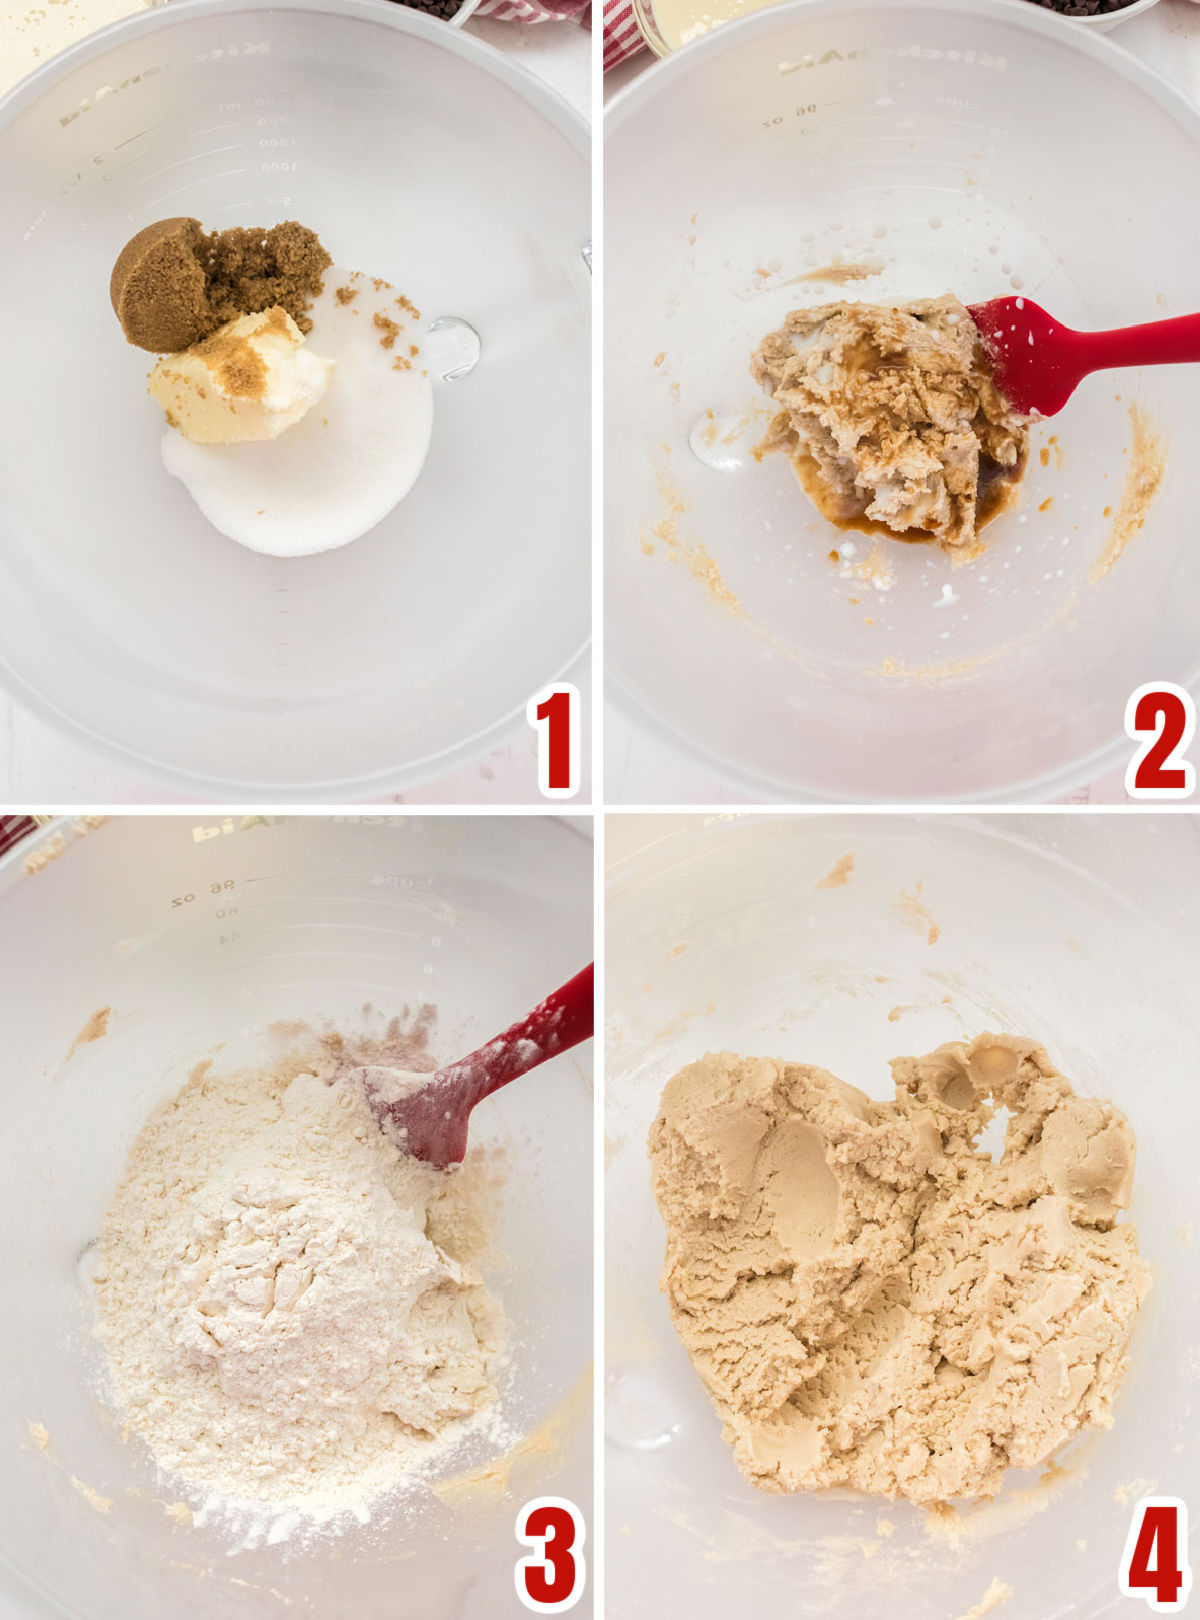 Collage image showing the steps for making the Edible Cookie Dough that will go in the fudge.